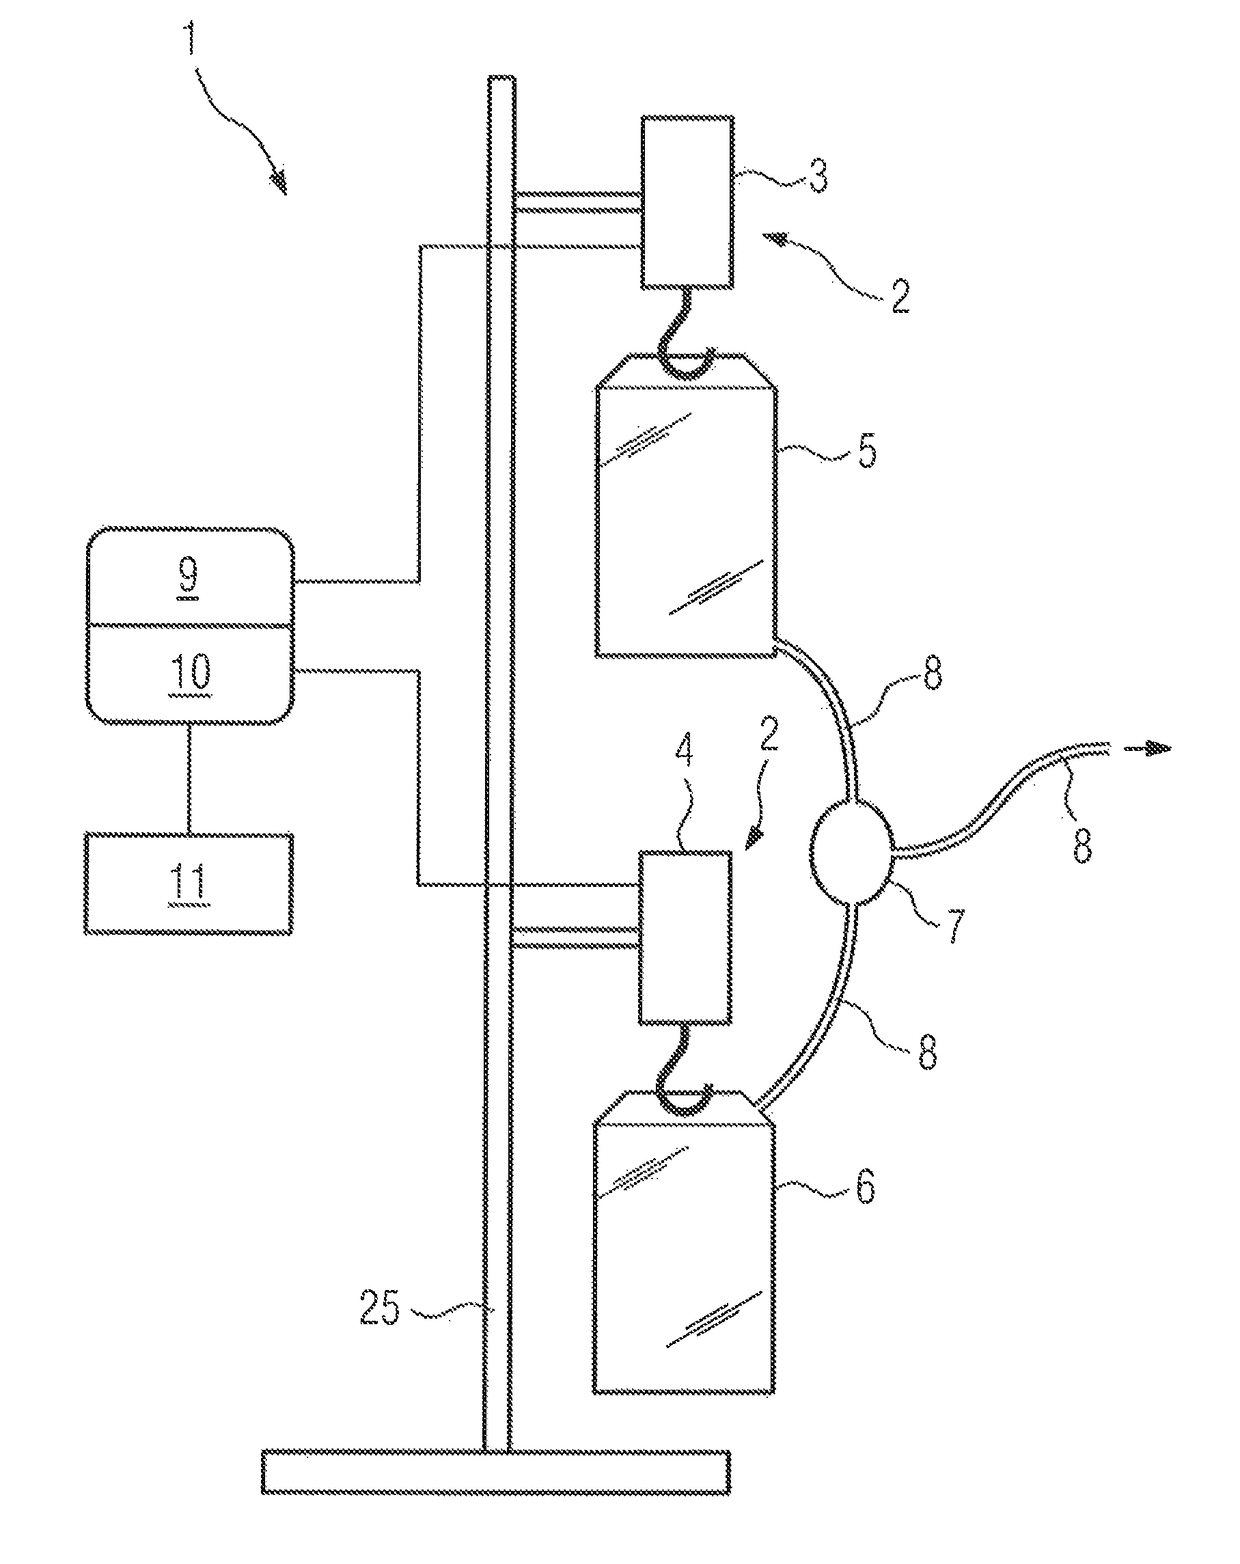 Sensor system for detection of phases and/or phase transitions in peritoneal dialysis treatments